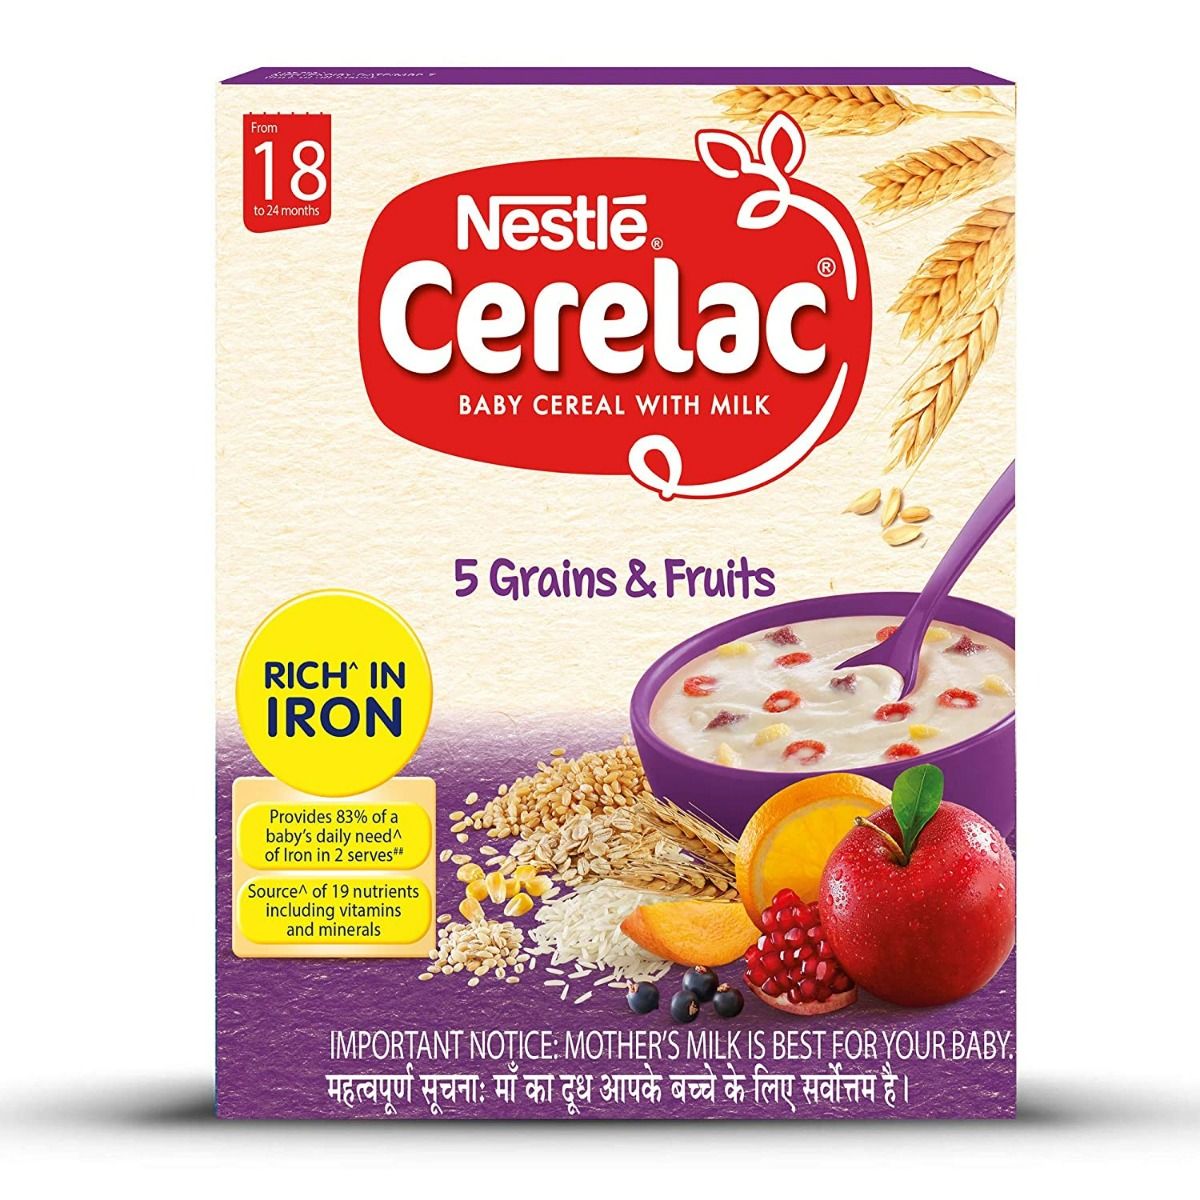 Nestle Cerelac Baby Cereal with Milk Wheat 5 Grains & Fruits Powder, 300 gm Refill Pack, Pack of 1 